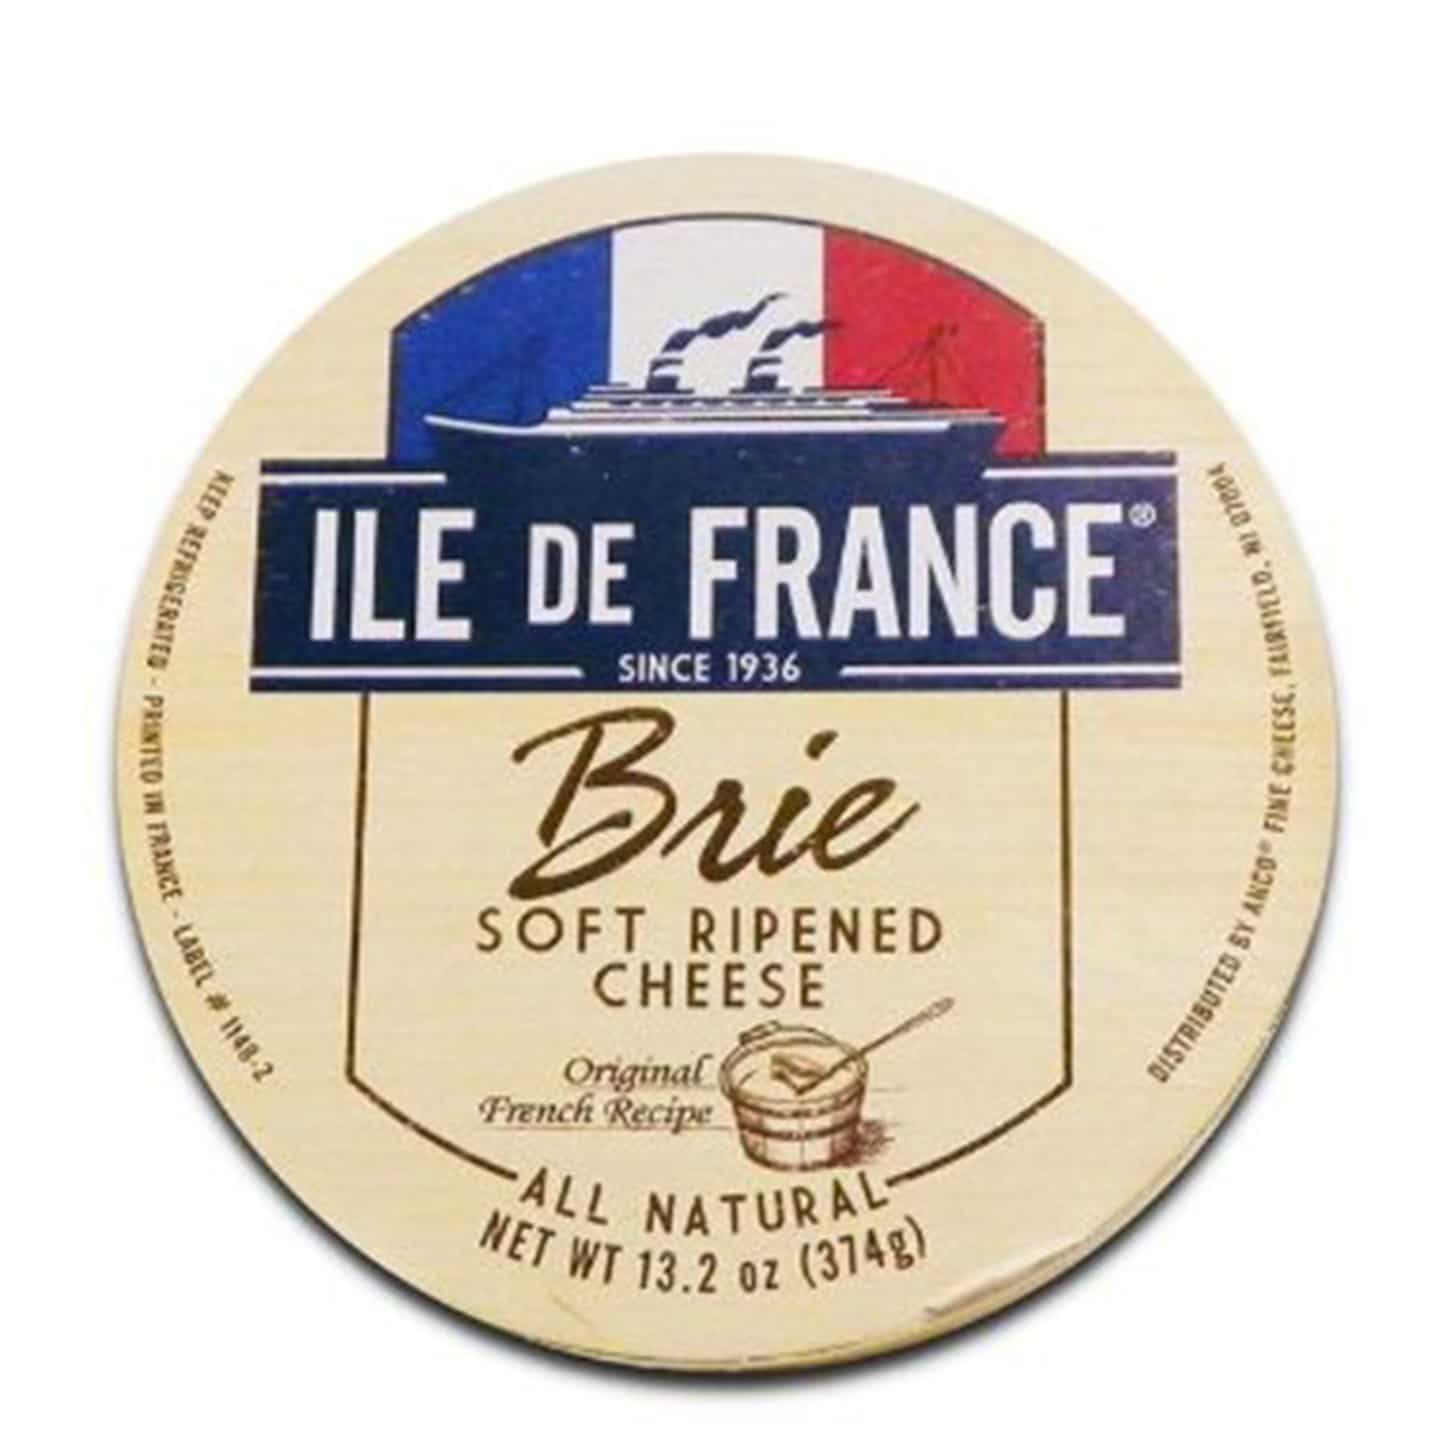 ile de france brie soft ripened cheese packaging